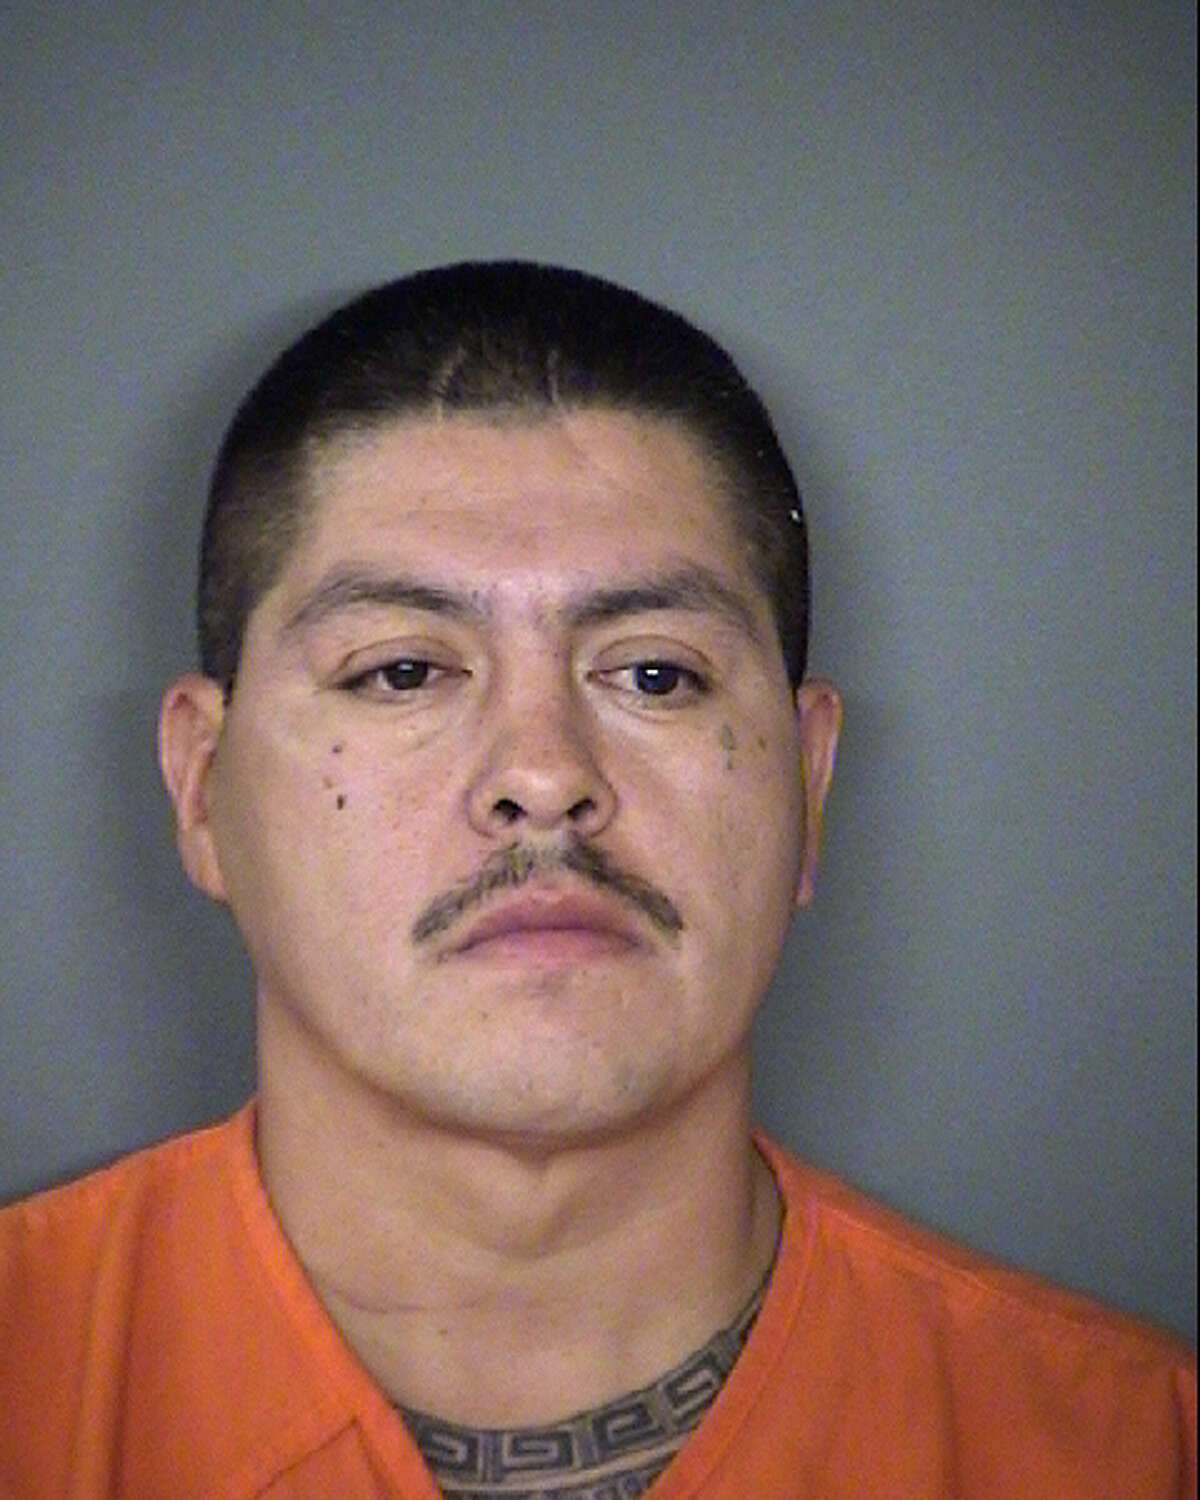 Leandro Torres, 45, faces a charge of murder. He remains in the Bexar County Jail. His bond amount has yet to be set.